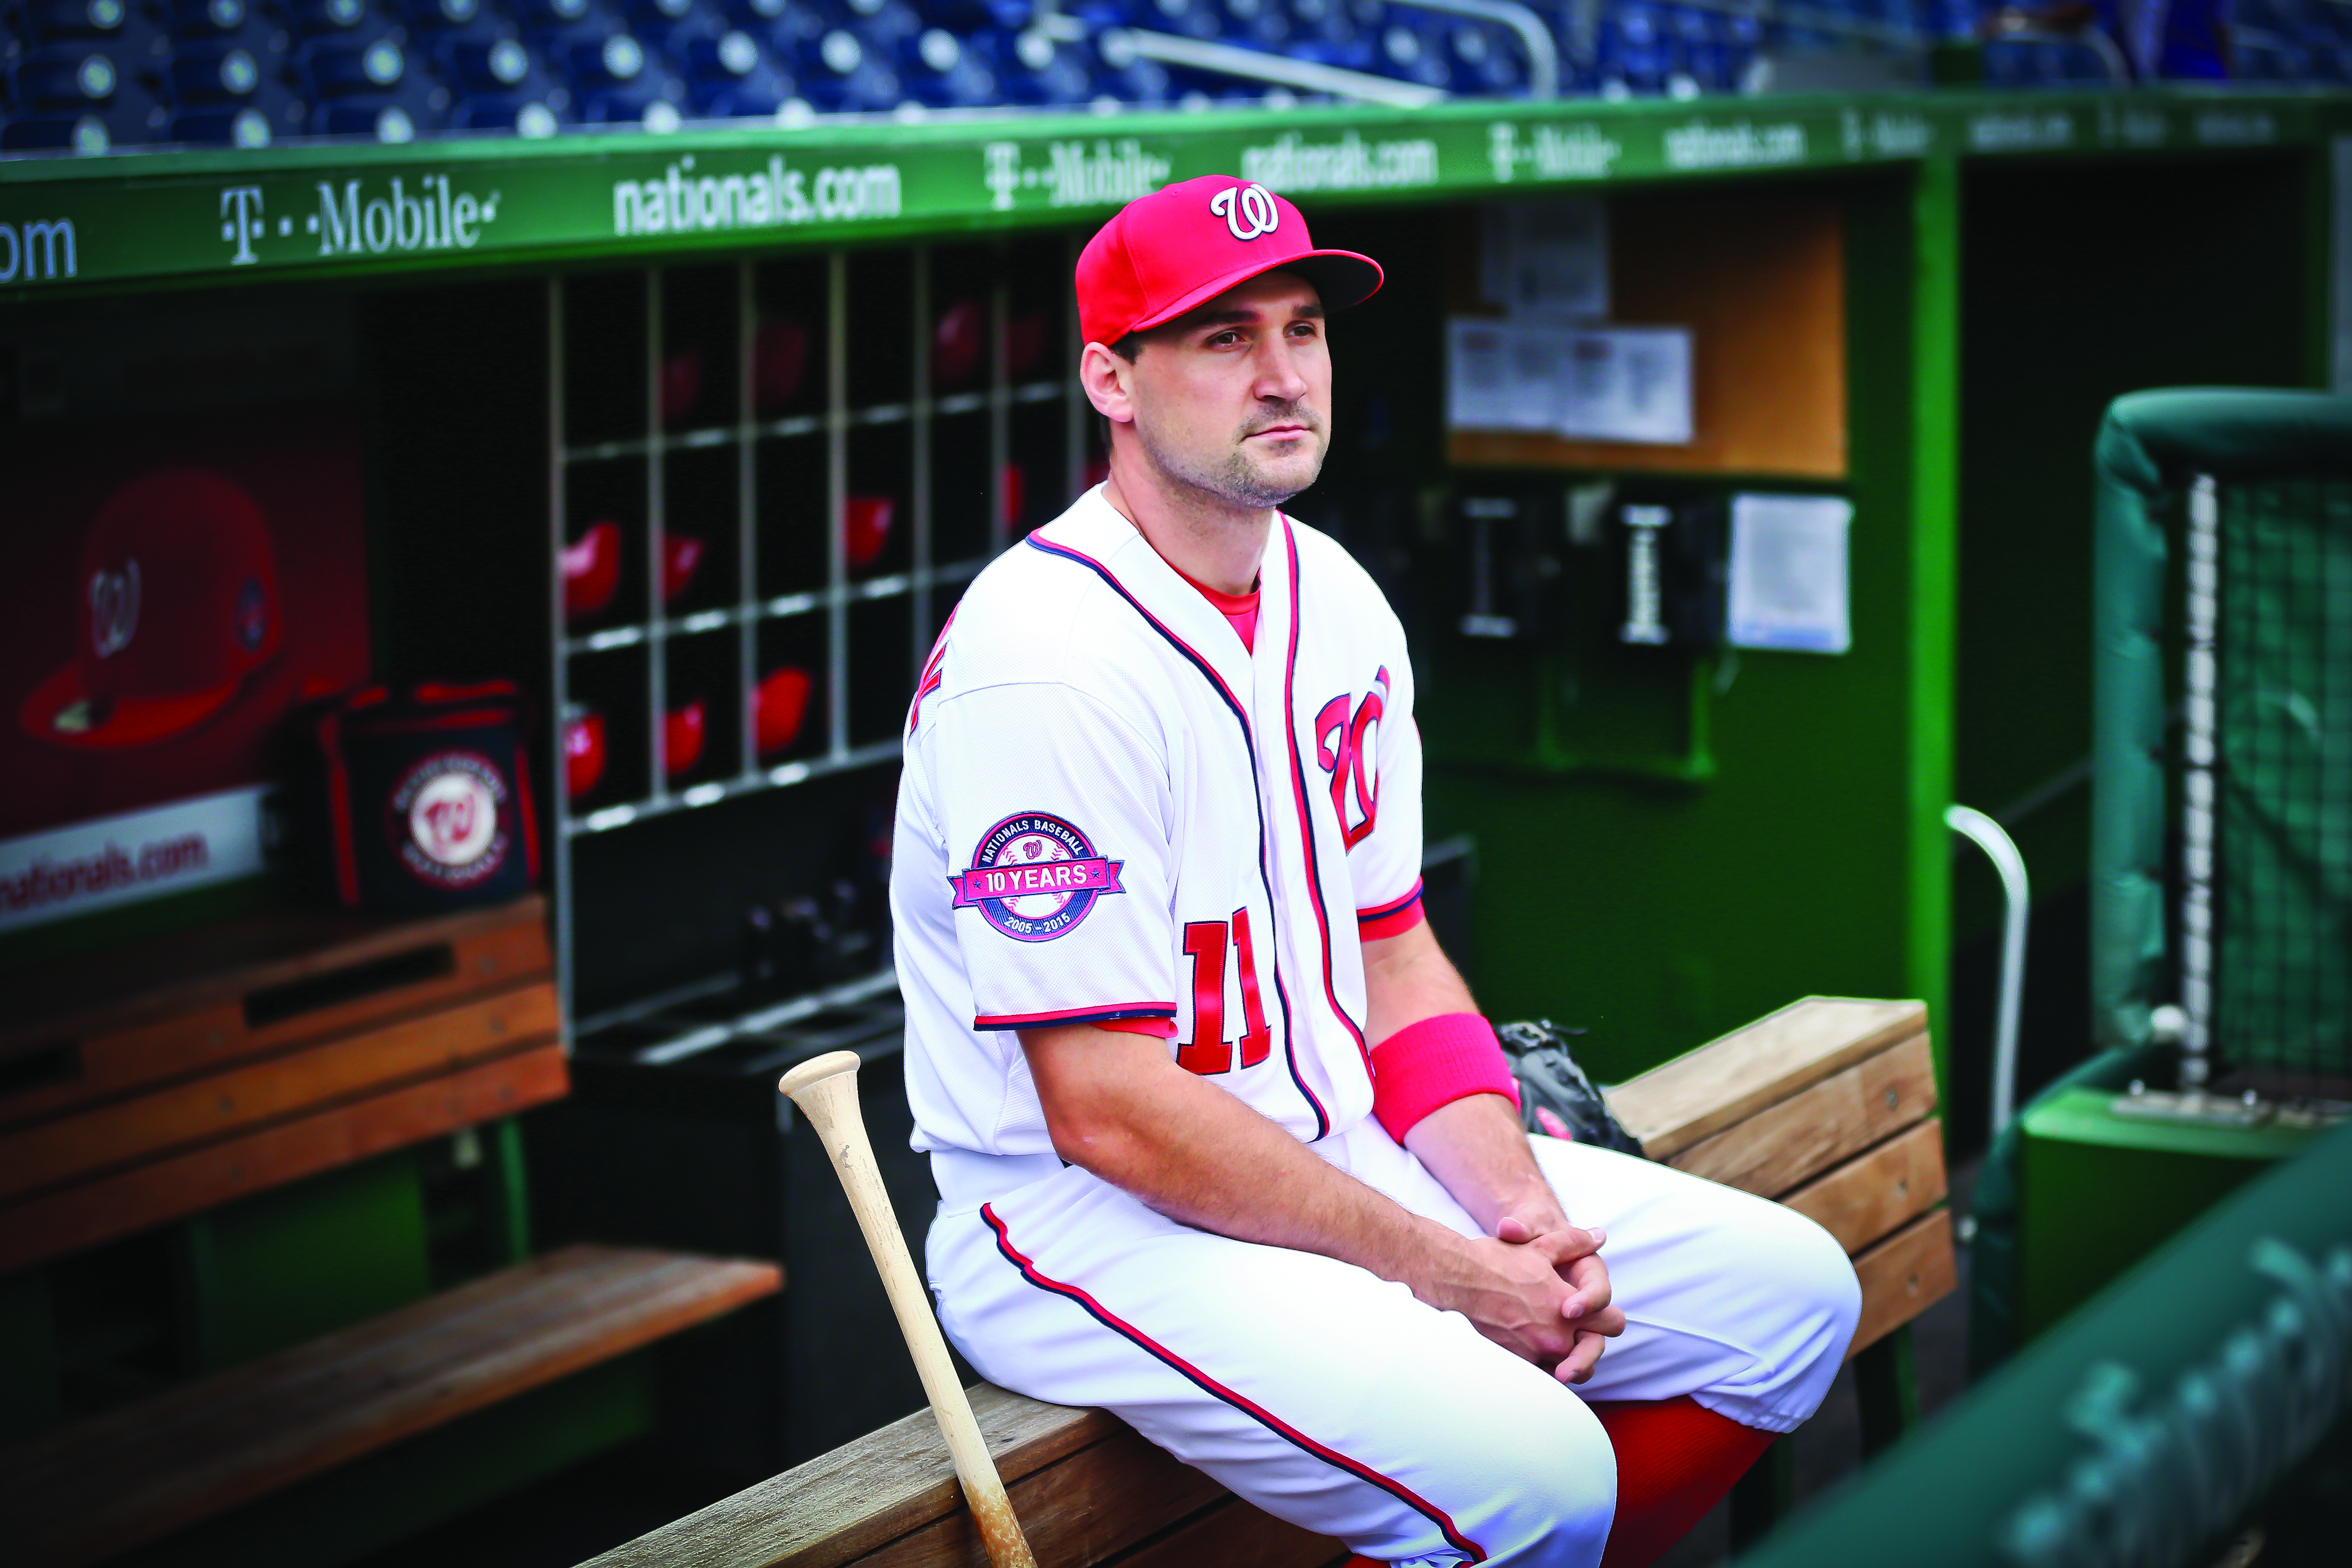 Ted Lerner to enter Ring of Honor, plus what's new at Nats Park - Blog